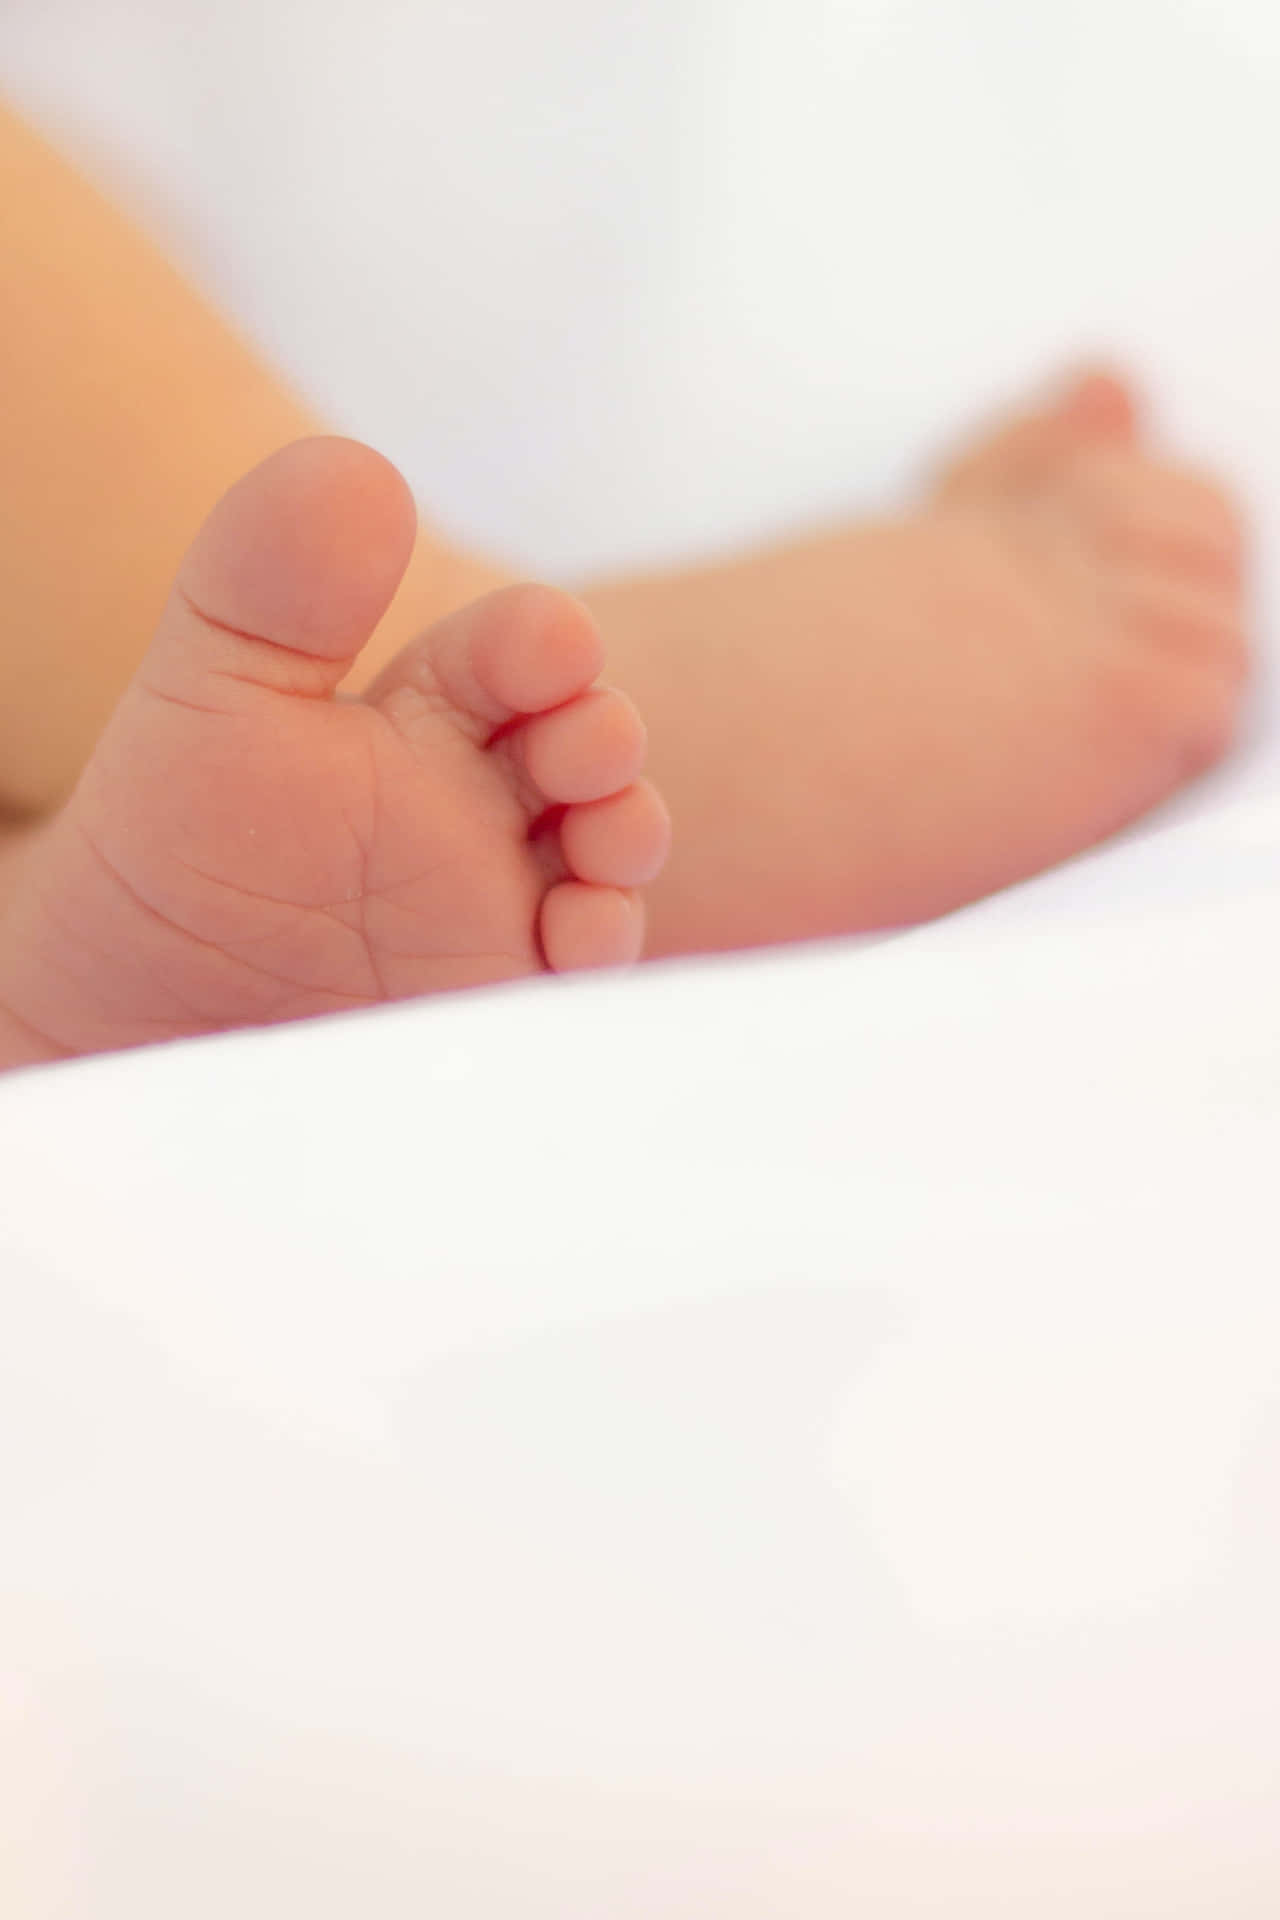 A Close Up Of A Baby's Feet Laying On A Bed